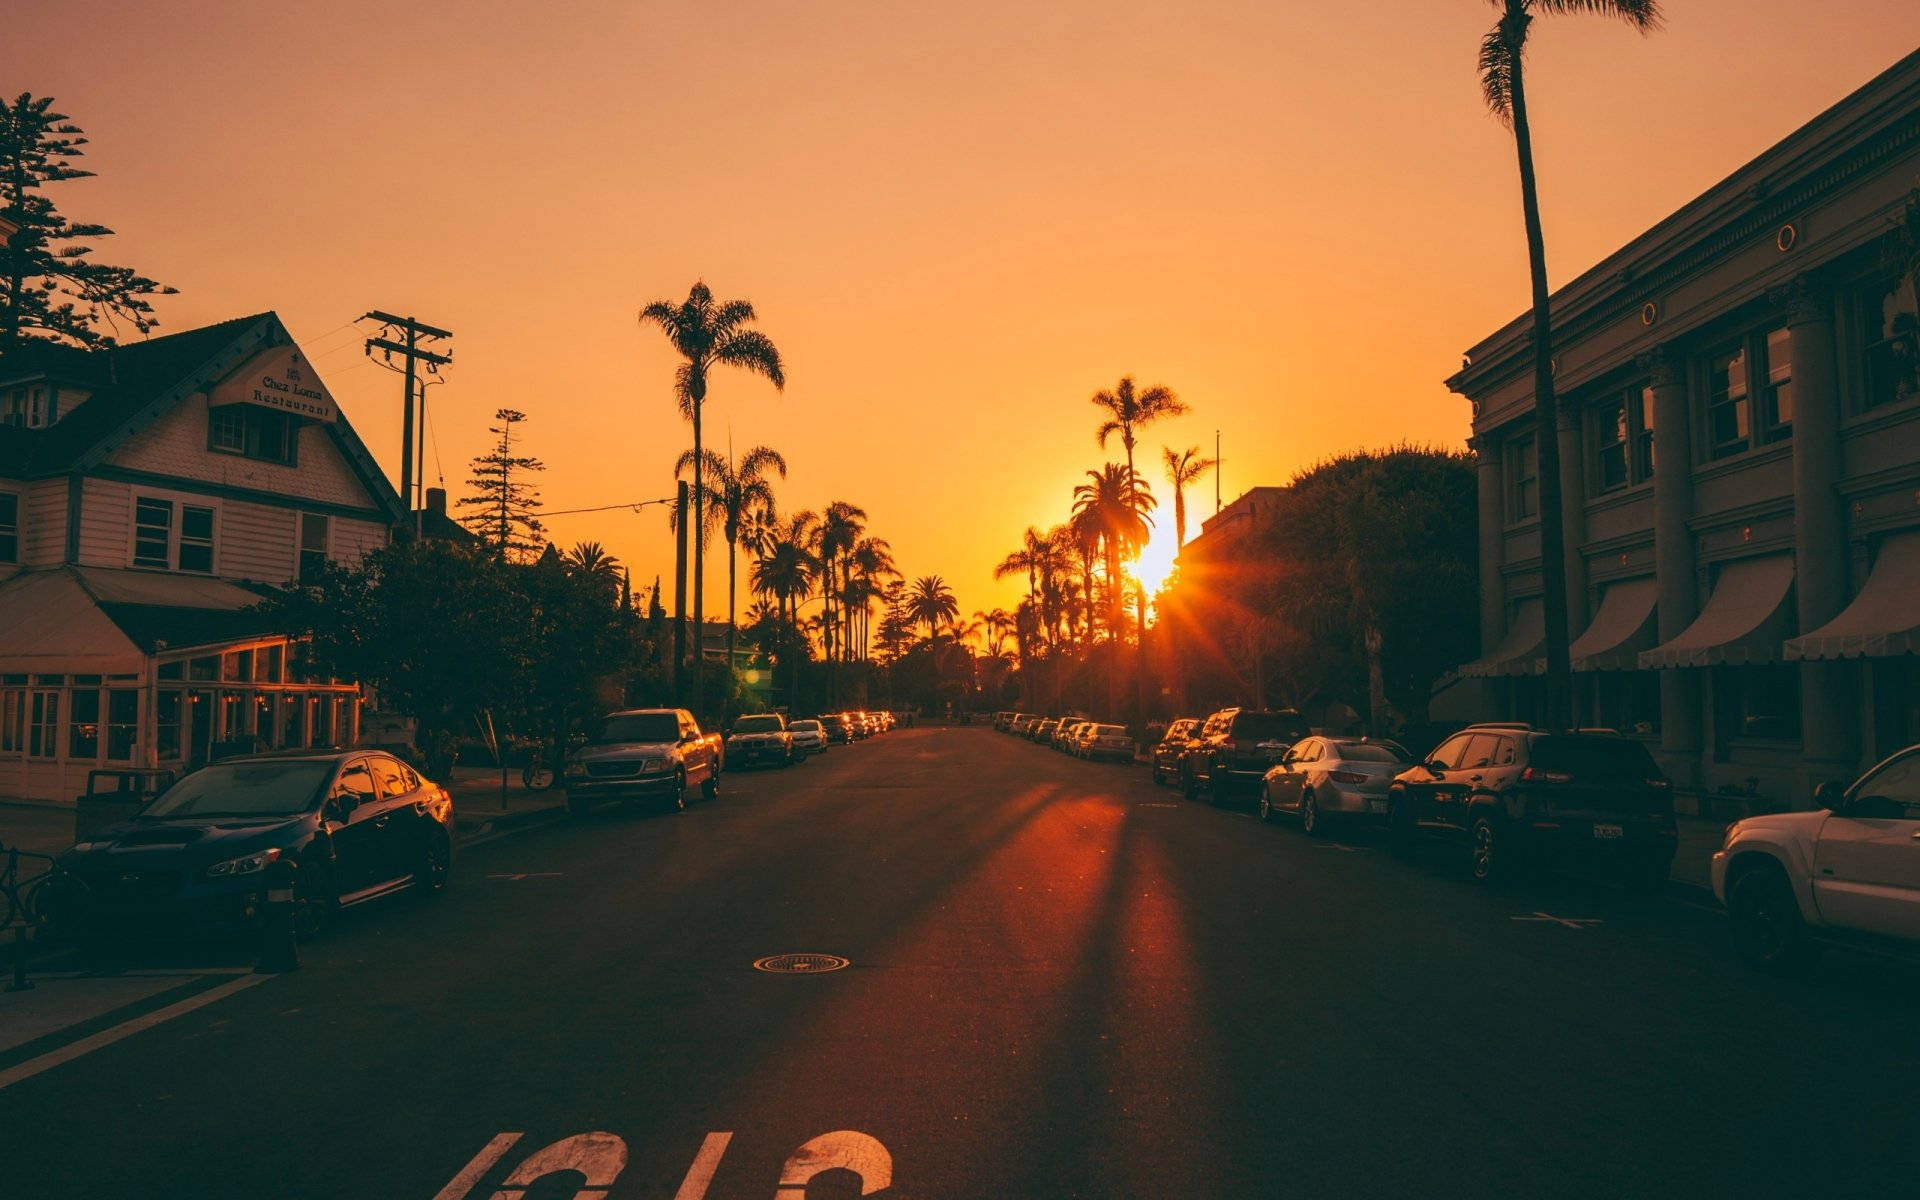 Peaceful Street During Neon Yellow Sunset Background